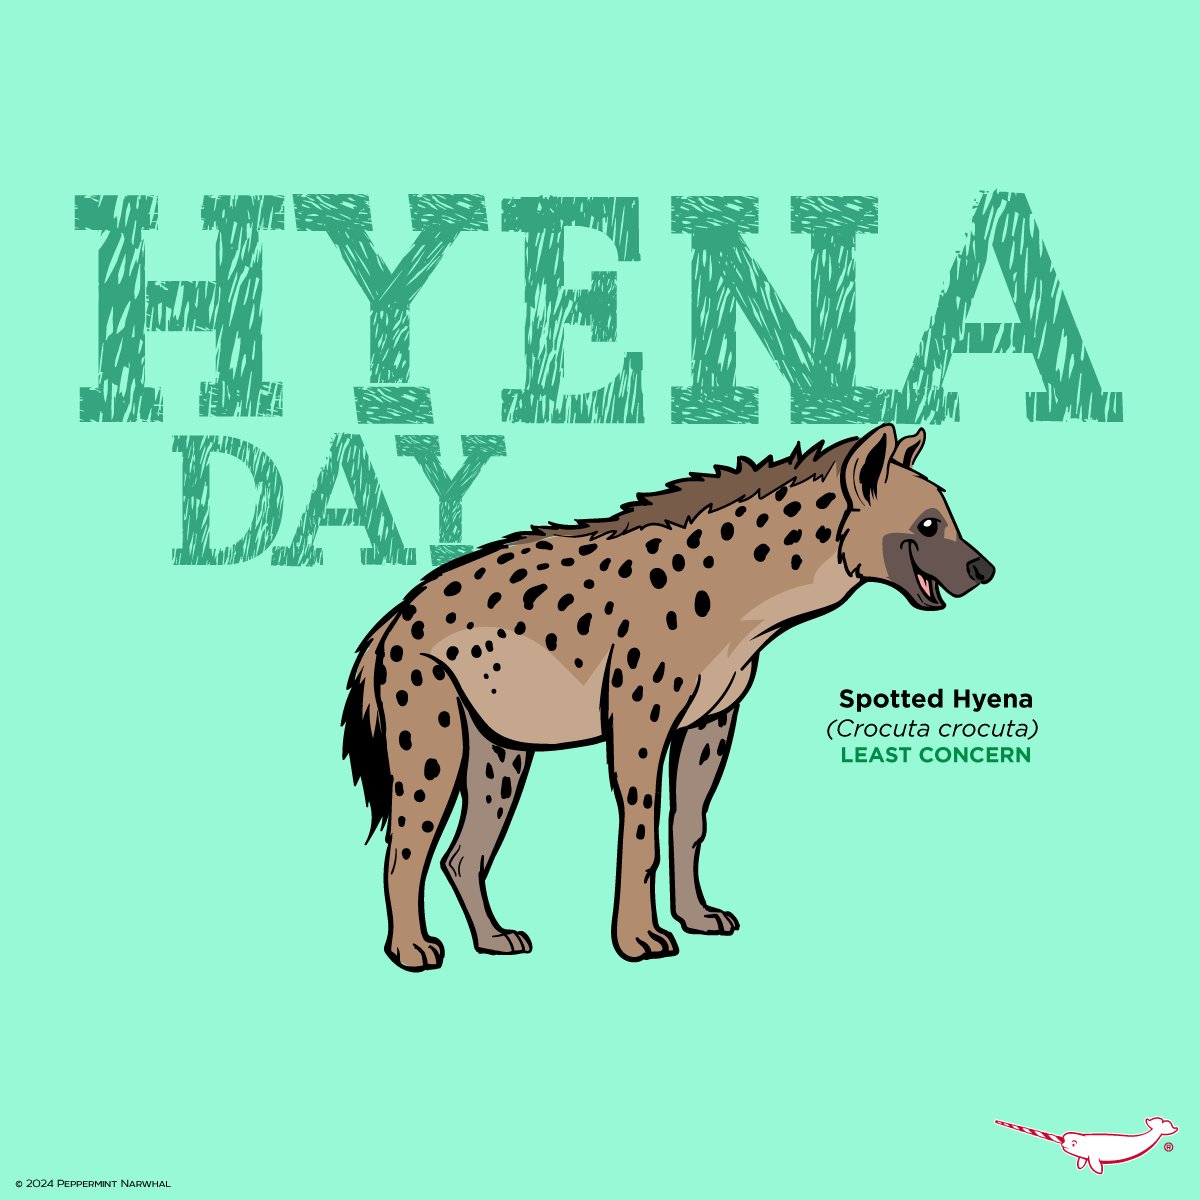 #HyenaDay #SpottedHyena Earth Day SALE - Save 20% Off Everything in the #PeppermintNarwhal Store. Shop Now: peppermintnarwhal.com Hurry Sale Ends 4/30/24. Int'l Shoppers visit our Etsy store: etsy.com/shop/Peppermin… #InternationalHyenaDay #WorldHyenaDay #Hyena